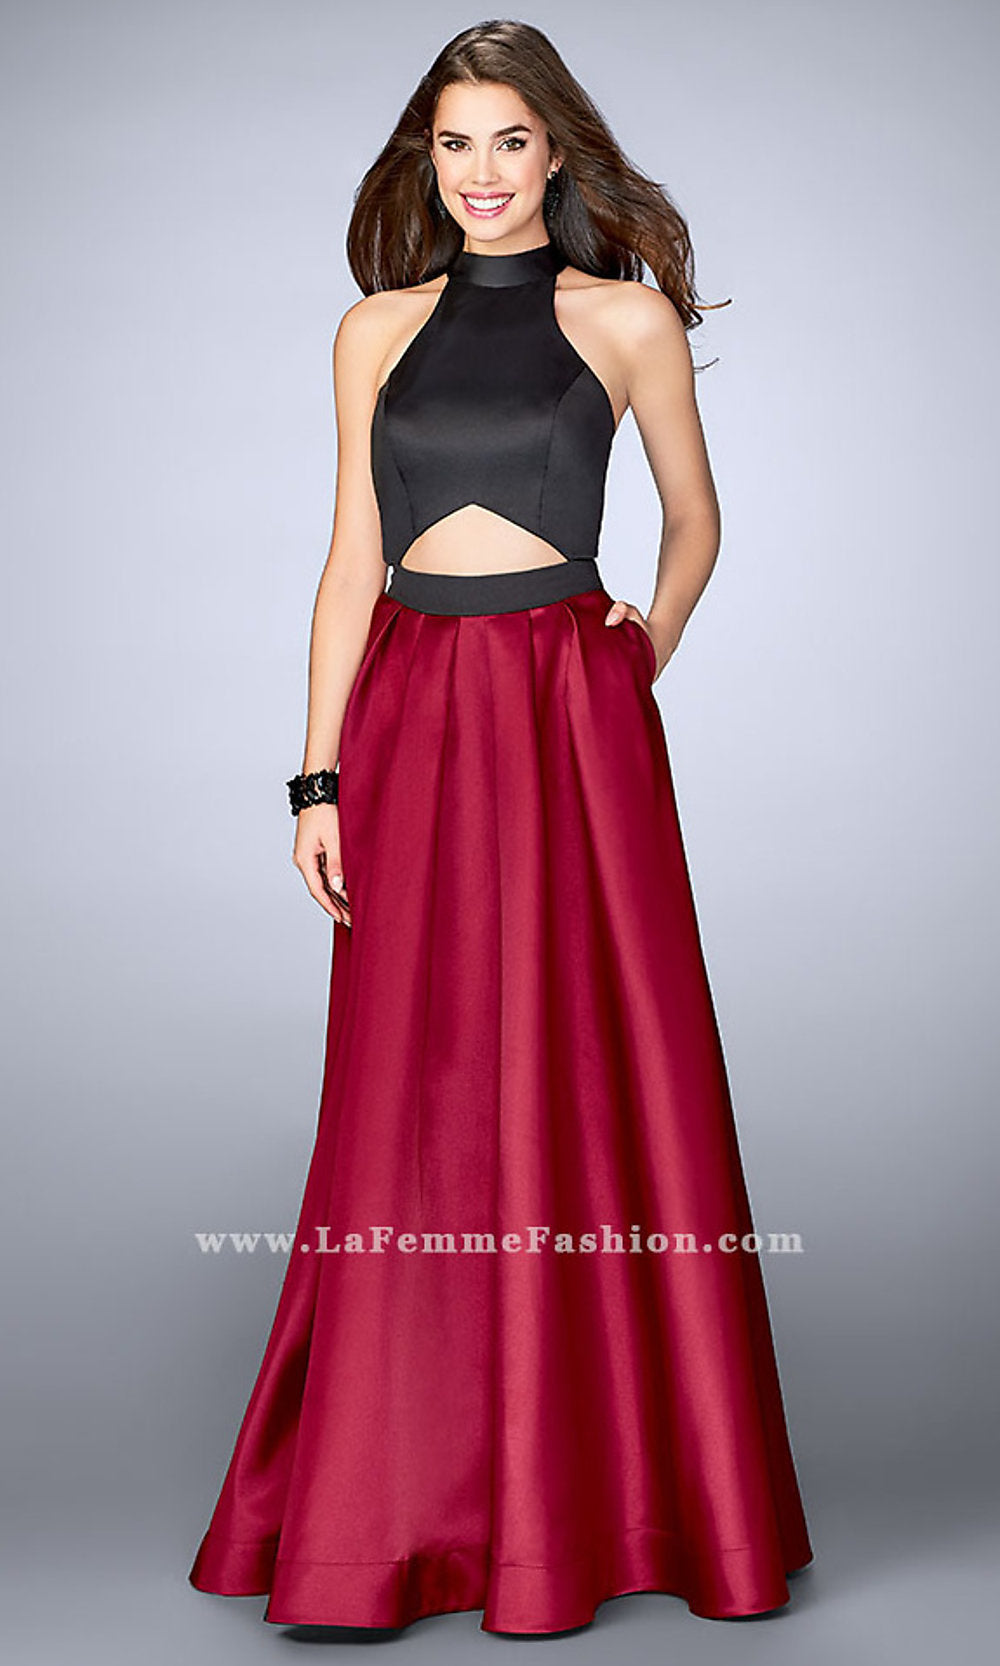 Black/Burgundy A-Line Two Tone Open Racer Back Prom Dress